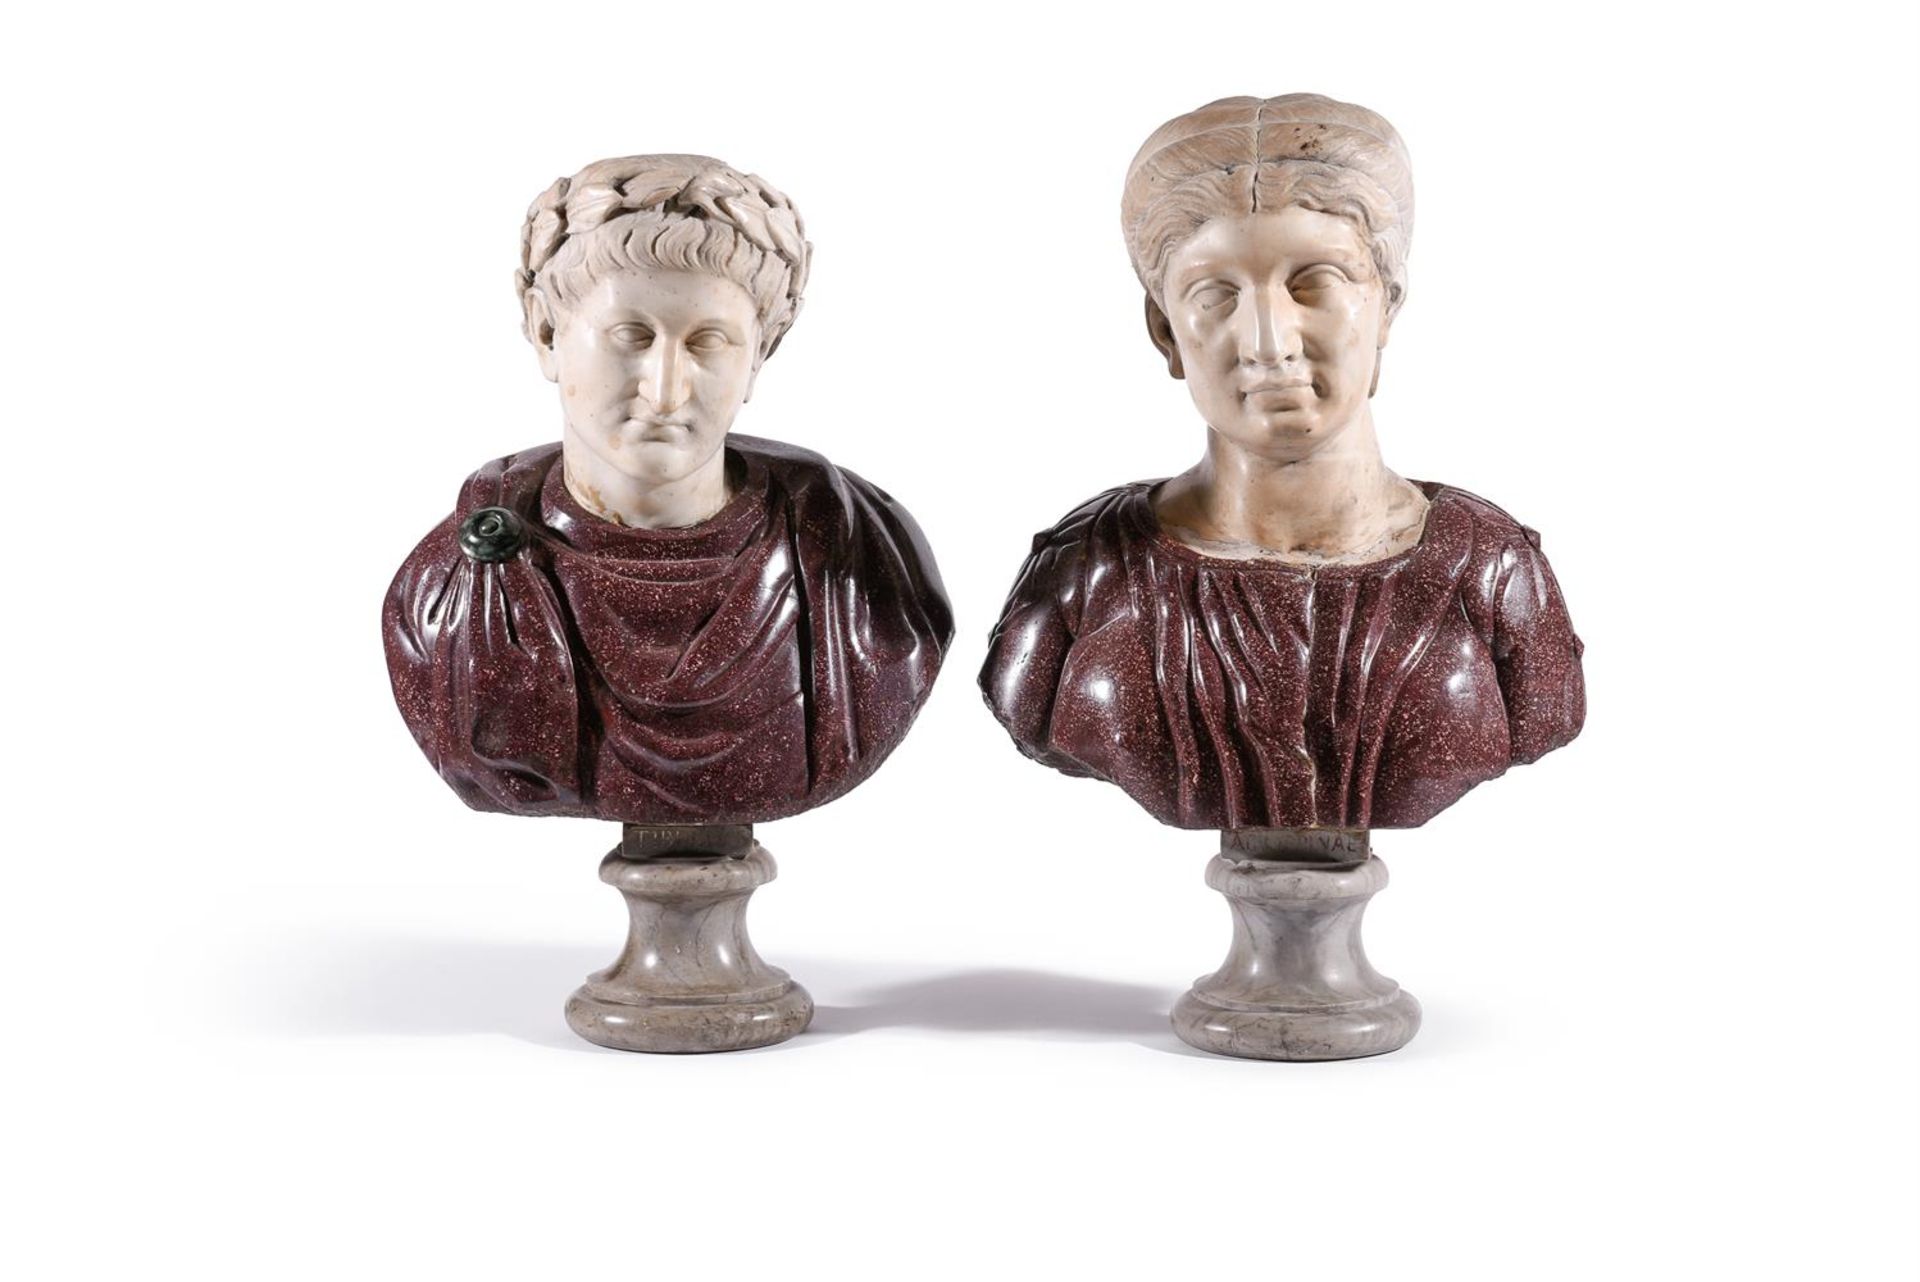 A NEAR PAIR OF ITALIAN WHITE MARBLE AND PORPHYRY BUSTS OF ANCIENT ROMANS, 17TH CENTURY OR EARLIER